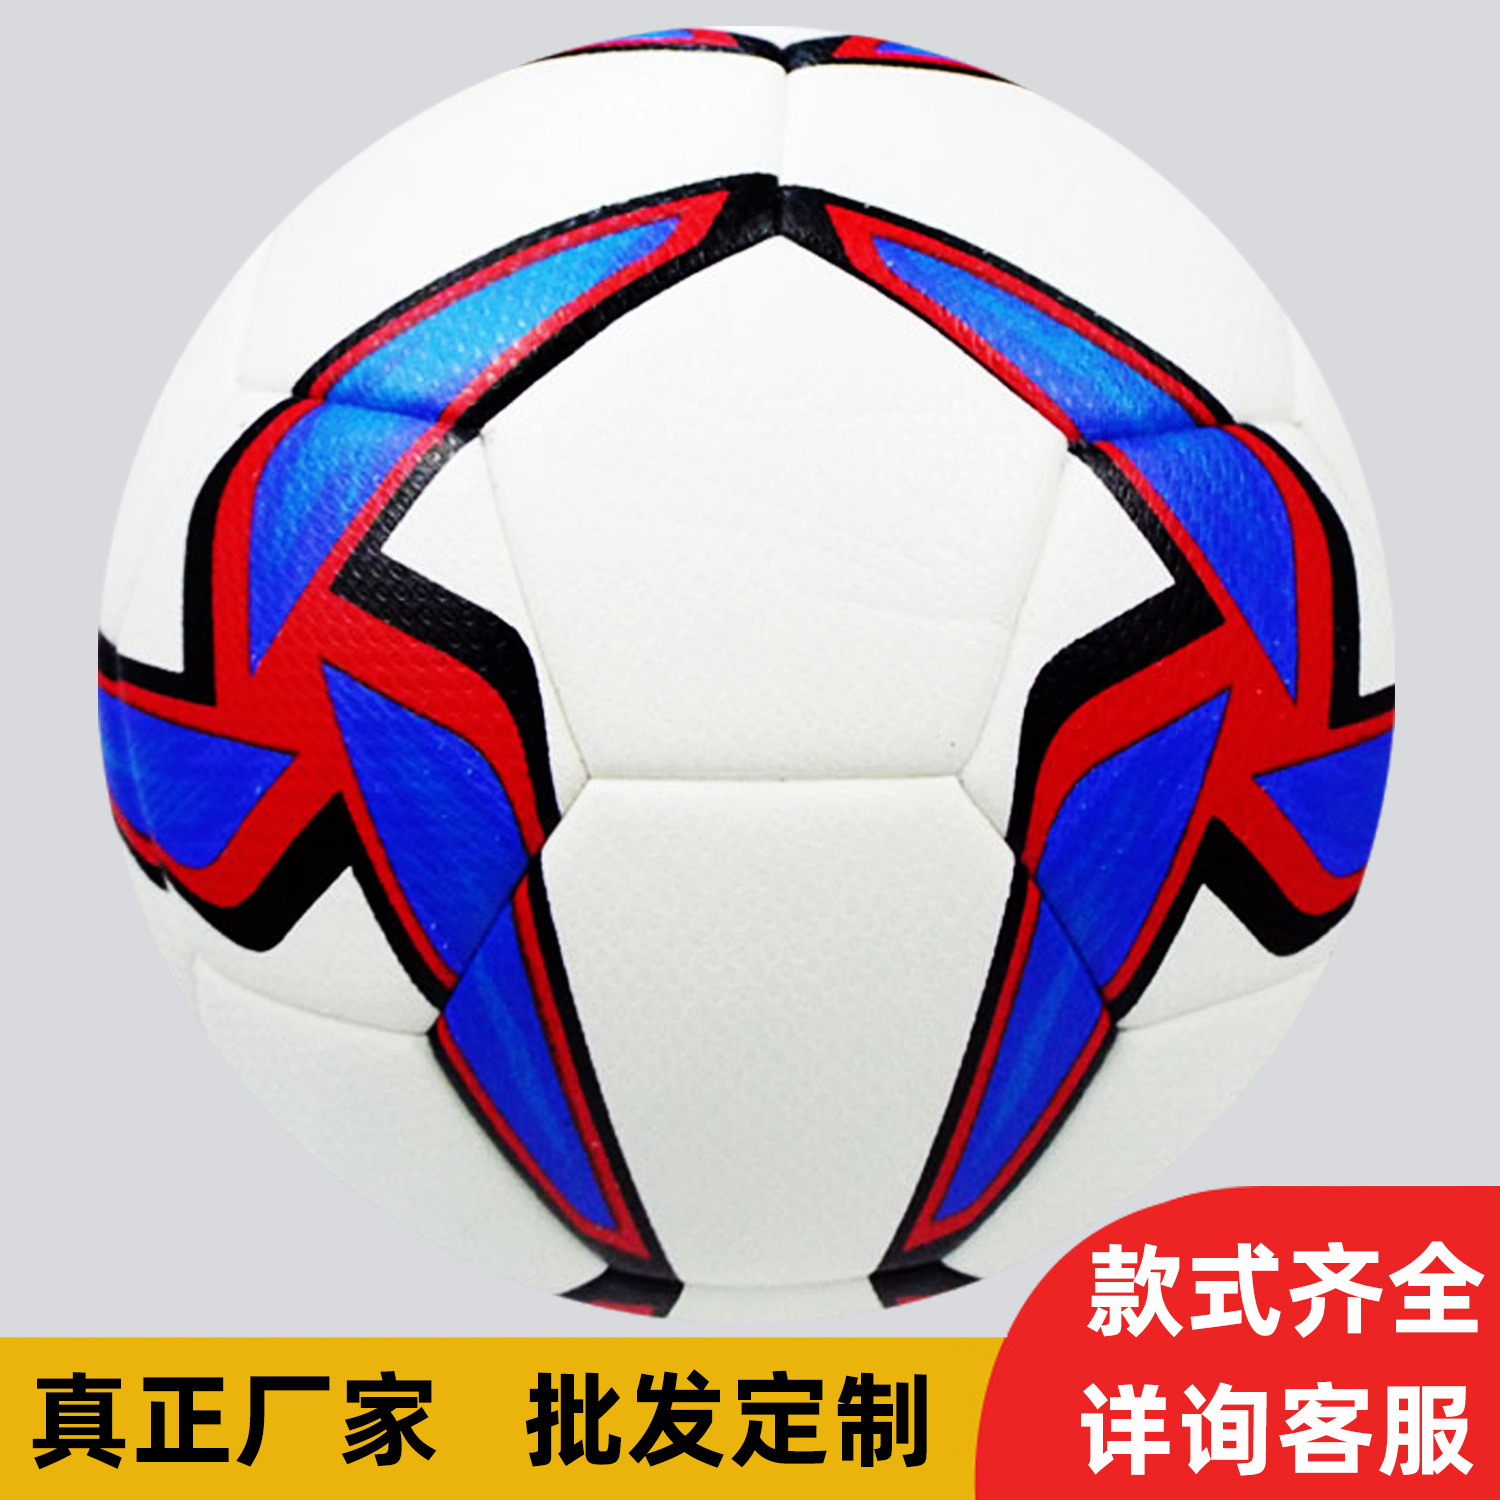 factory football wholesale adhesive football proofing sales primary and secondary school students match training soccer